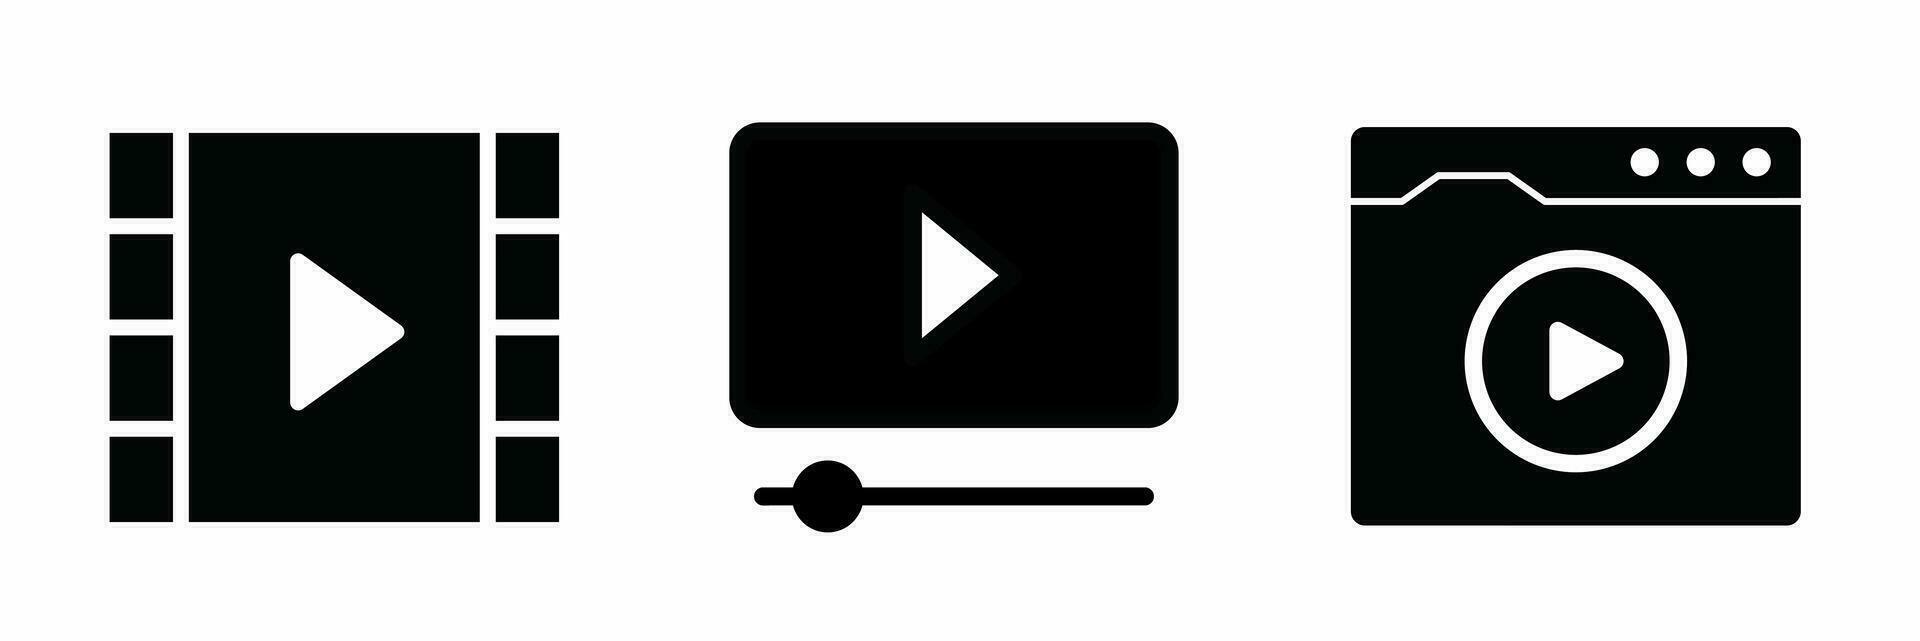 Video player icon black white illustration collection. vector